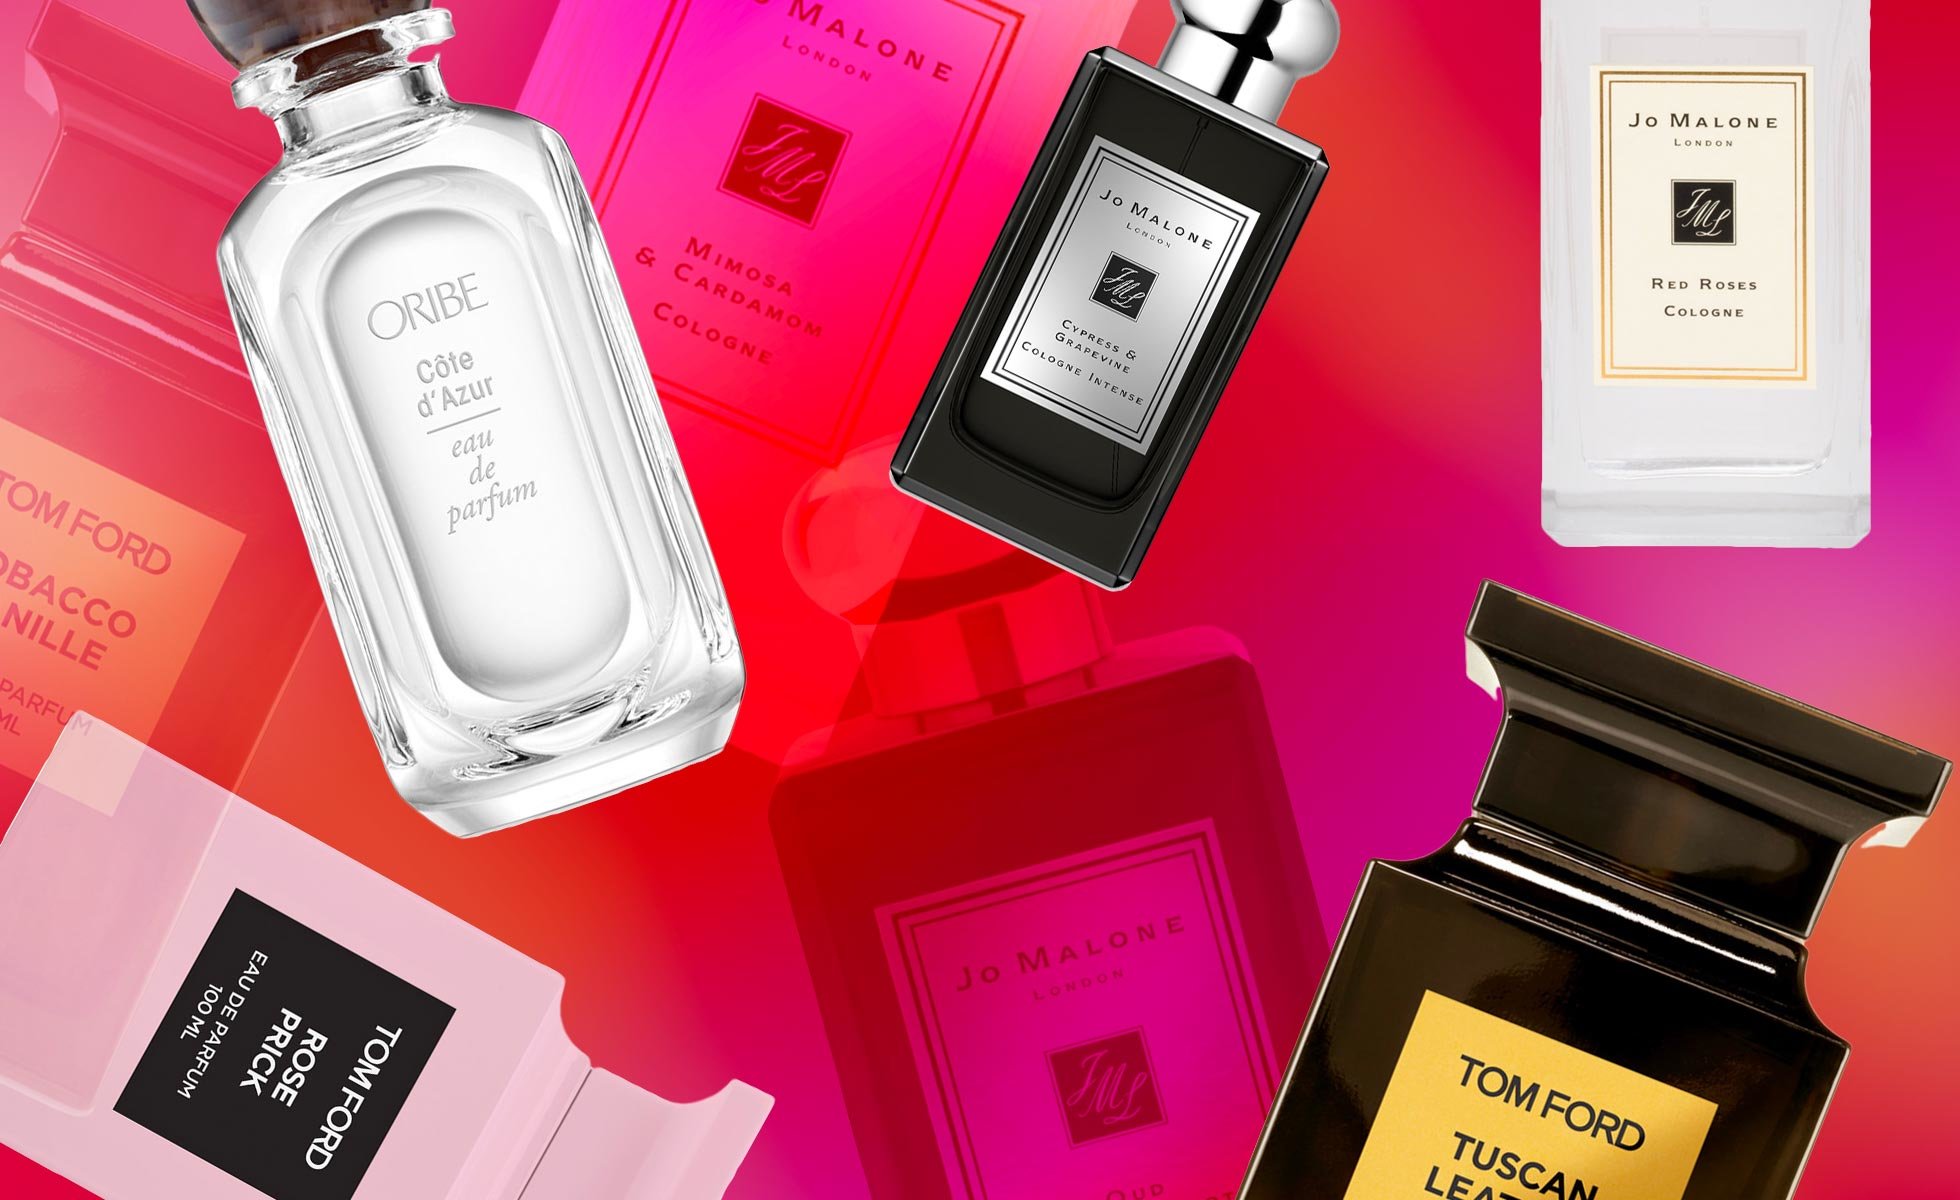 A Valentine's Day Fragrance Gift Guide to Add to Their Cologne Collection |  Beautylish